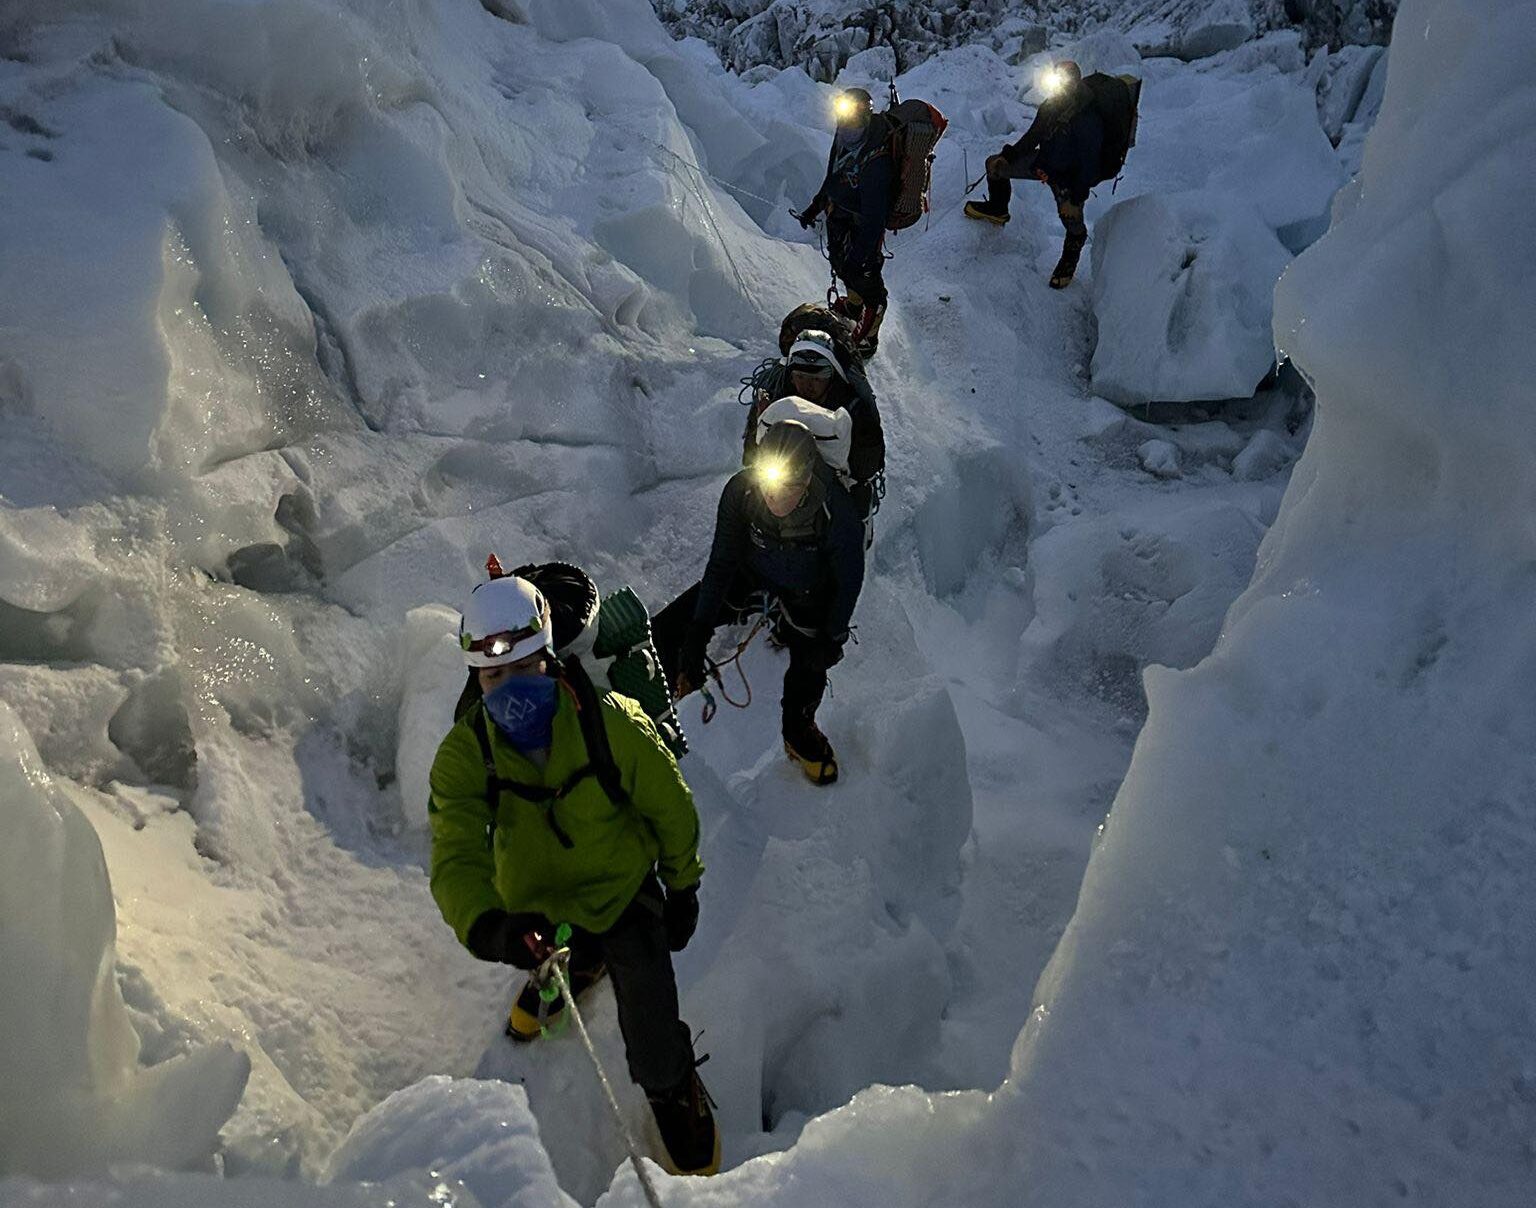 Climbers with headlamps on at dawn, among seracs at Everest Khumbu Icefall